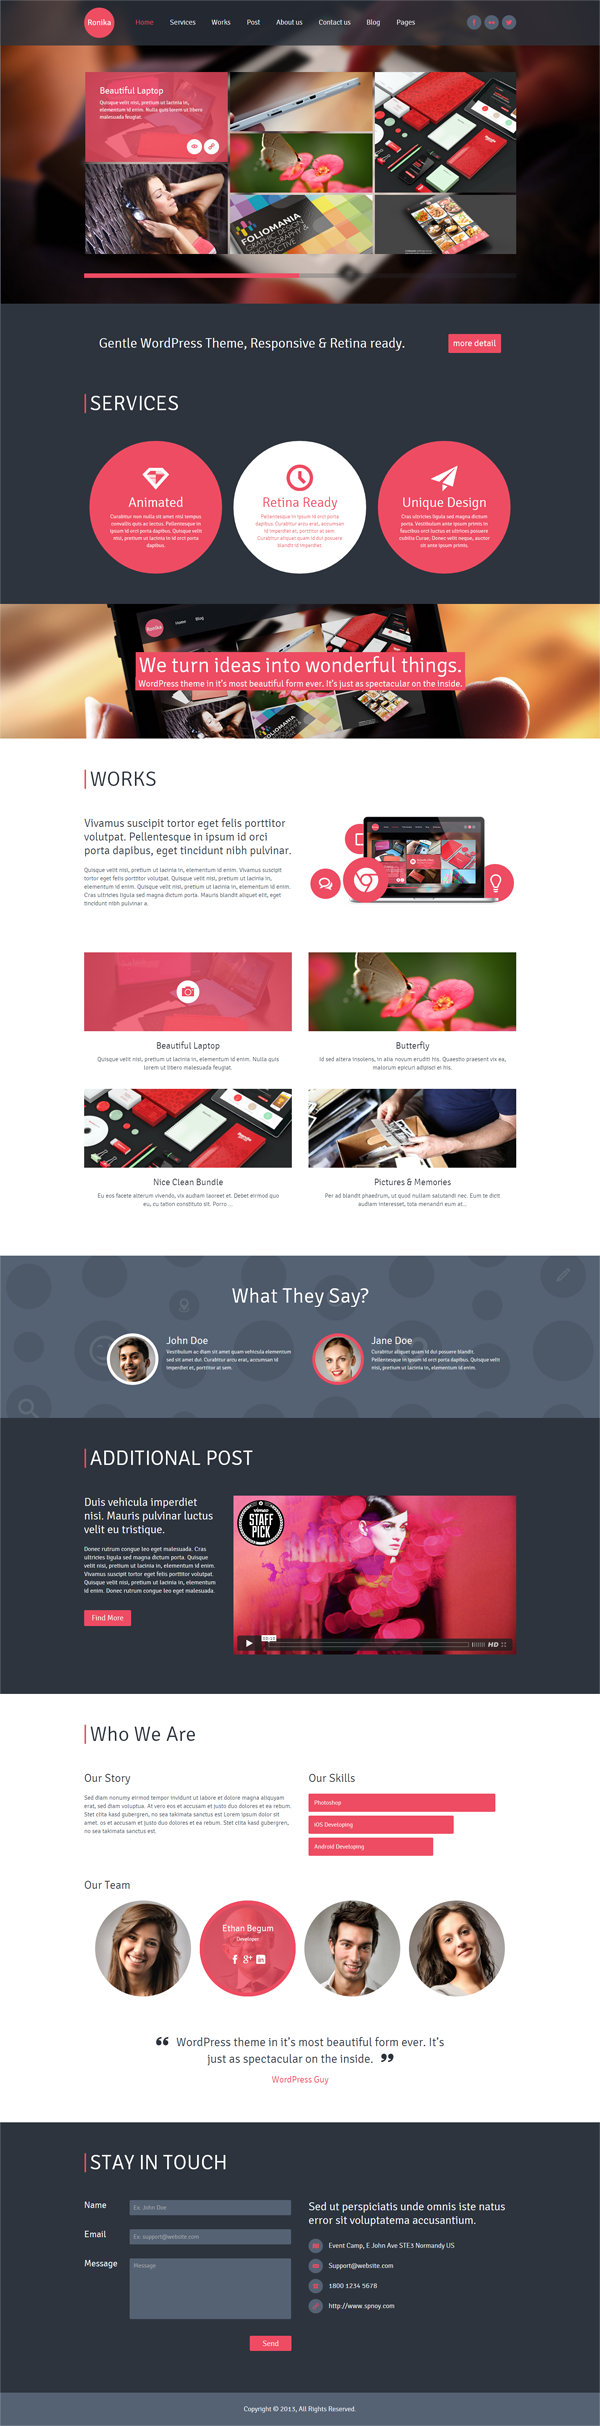 Website template wordpress parallax spnoy creative One Page